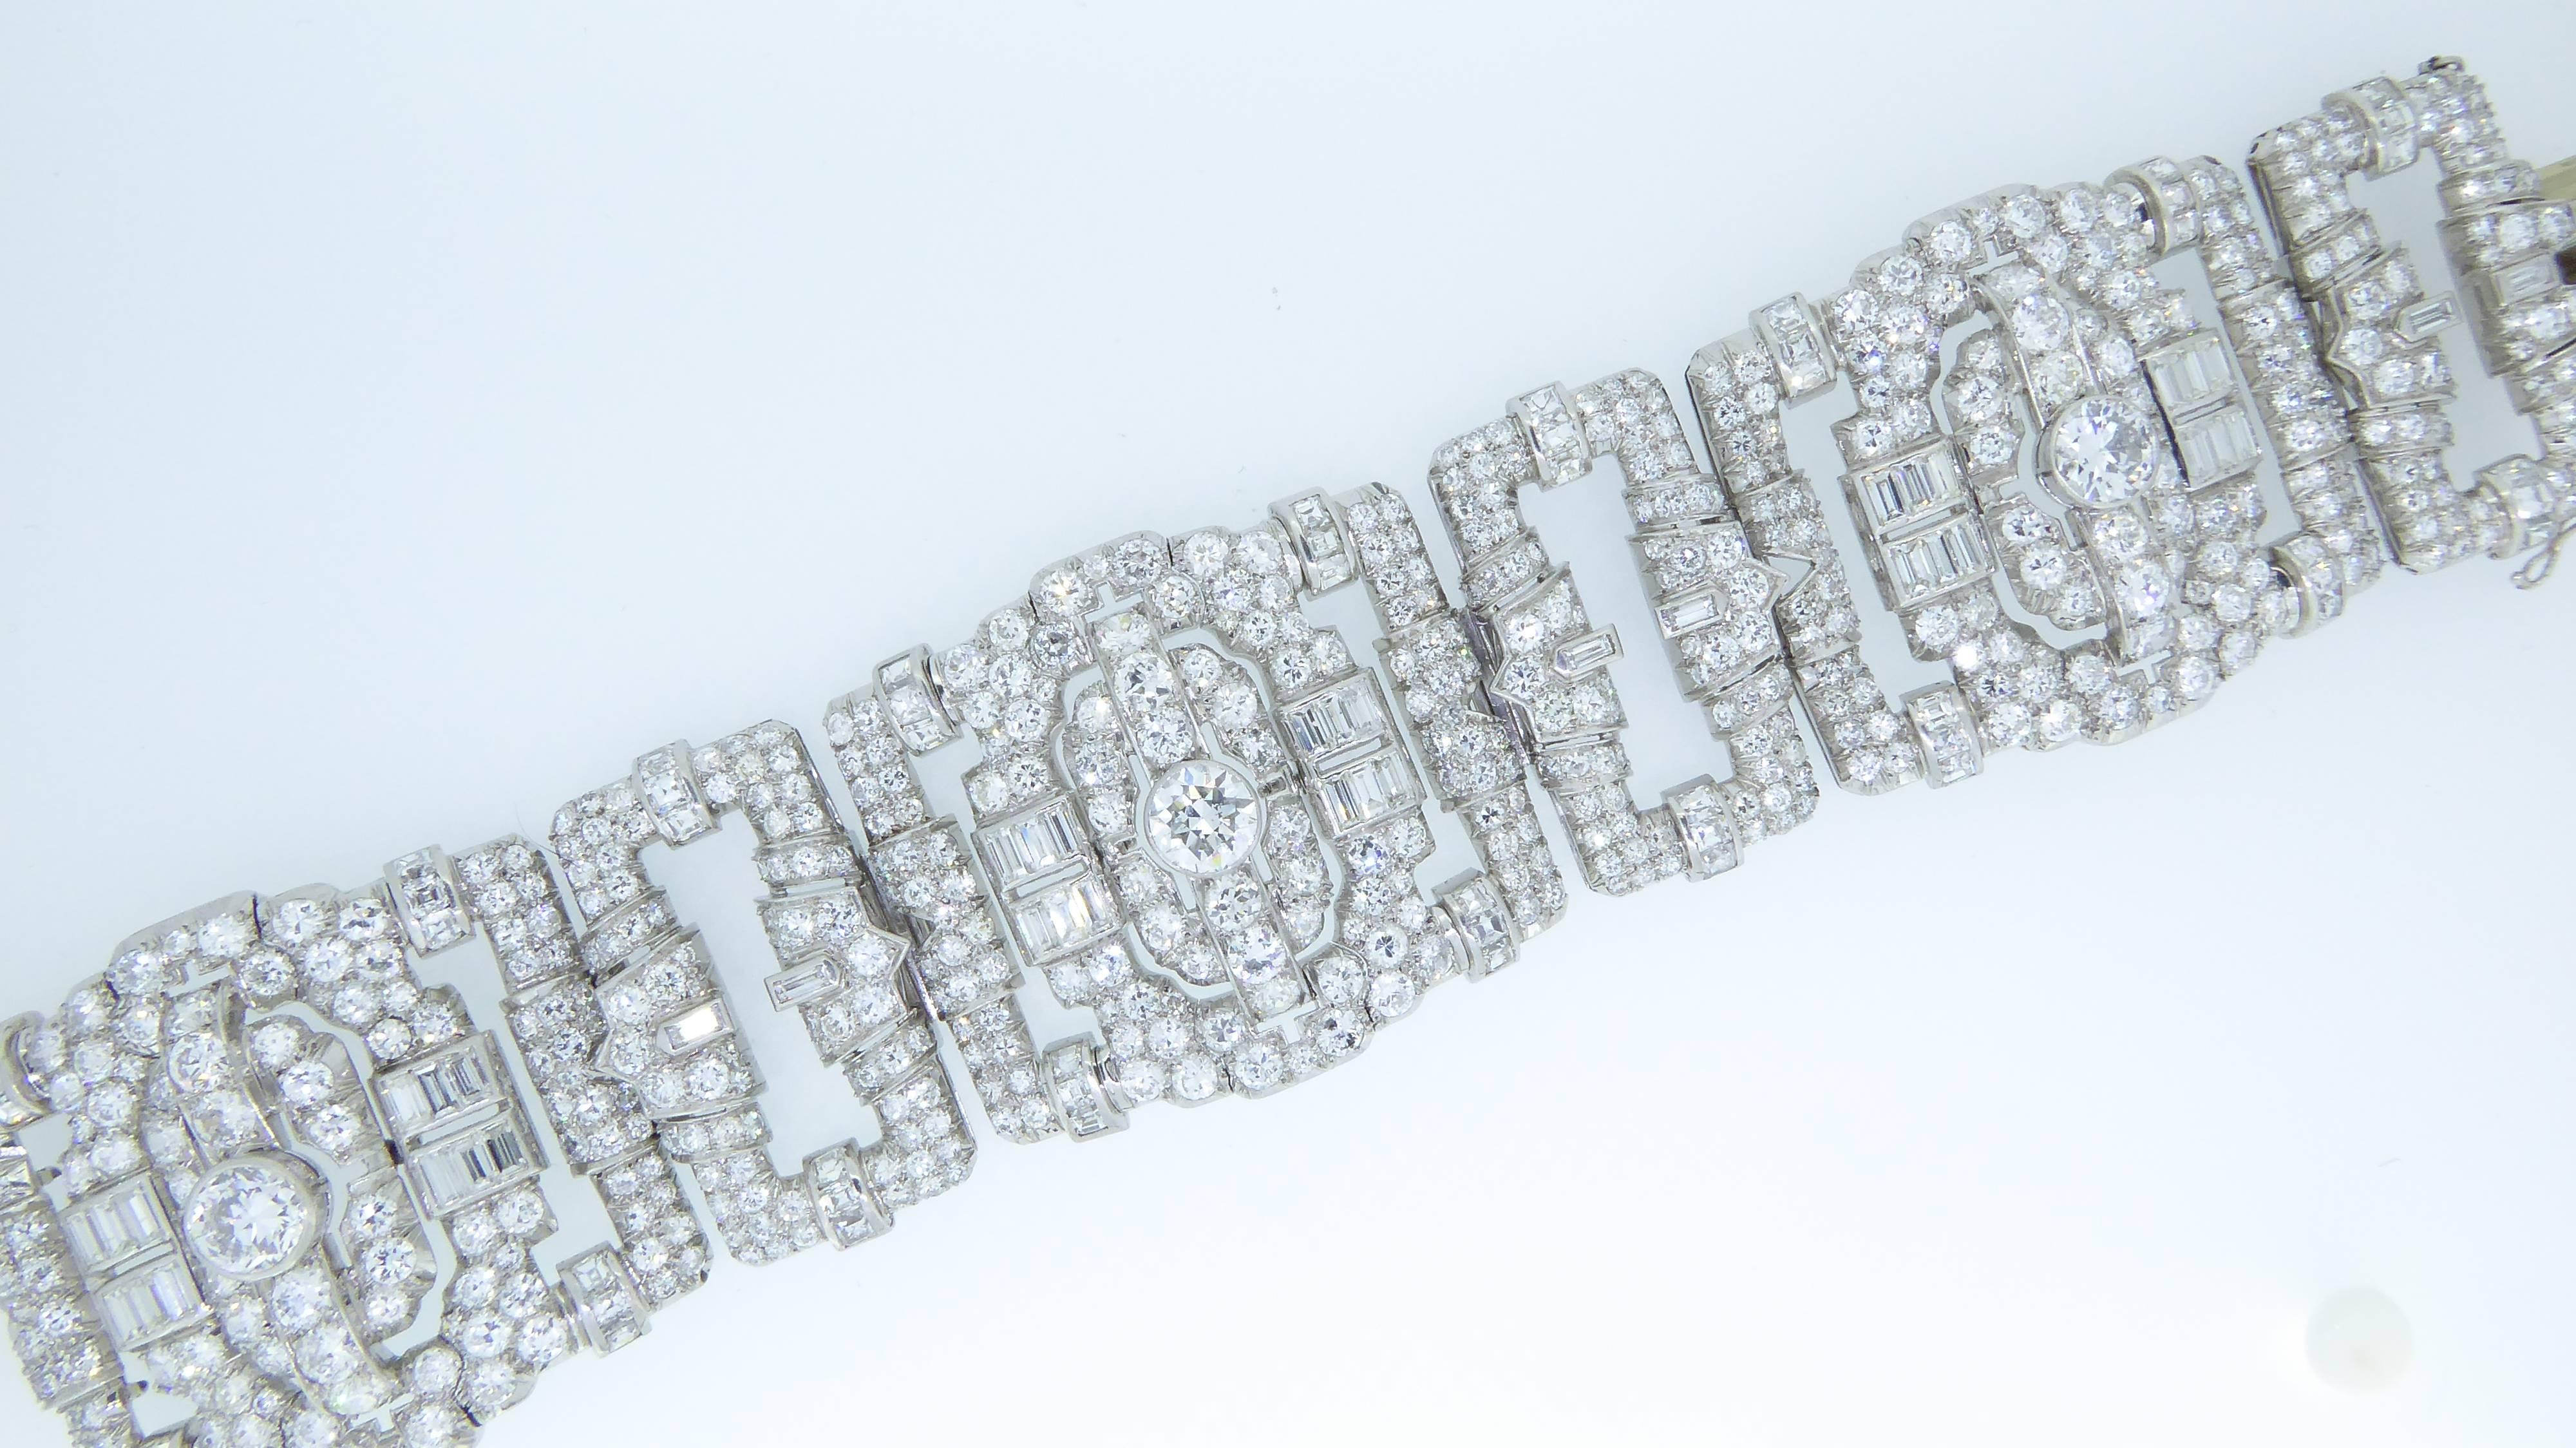 An Art Deco platinum and diamond bracelet. Circa 1930s. With three large rectangular openwork links and three smaller links pave and channel-set with brilliant and baguette-cut diamonds. Estimated 35 carats of diamonds in total, including three